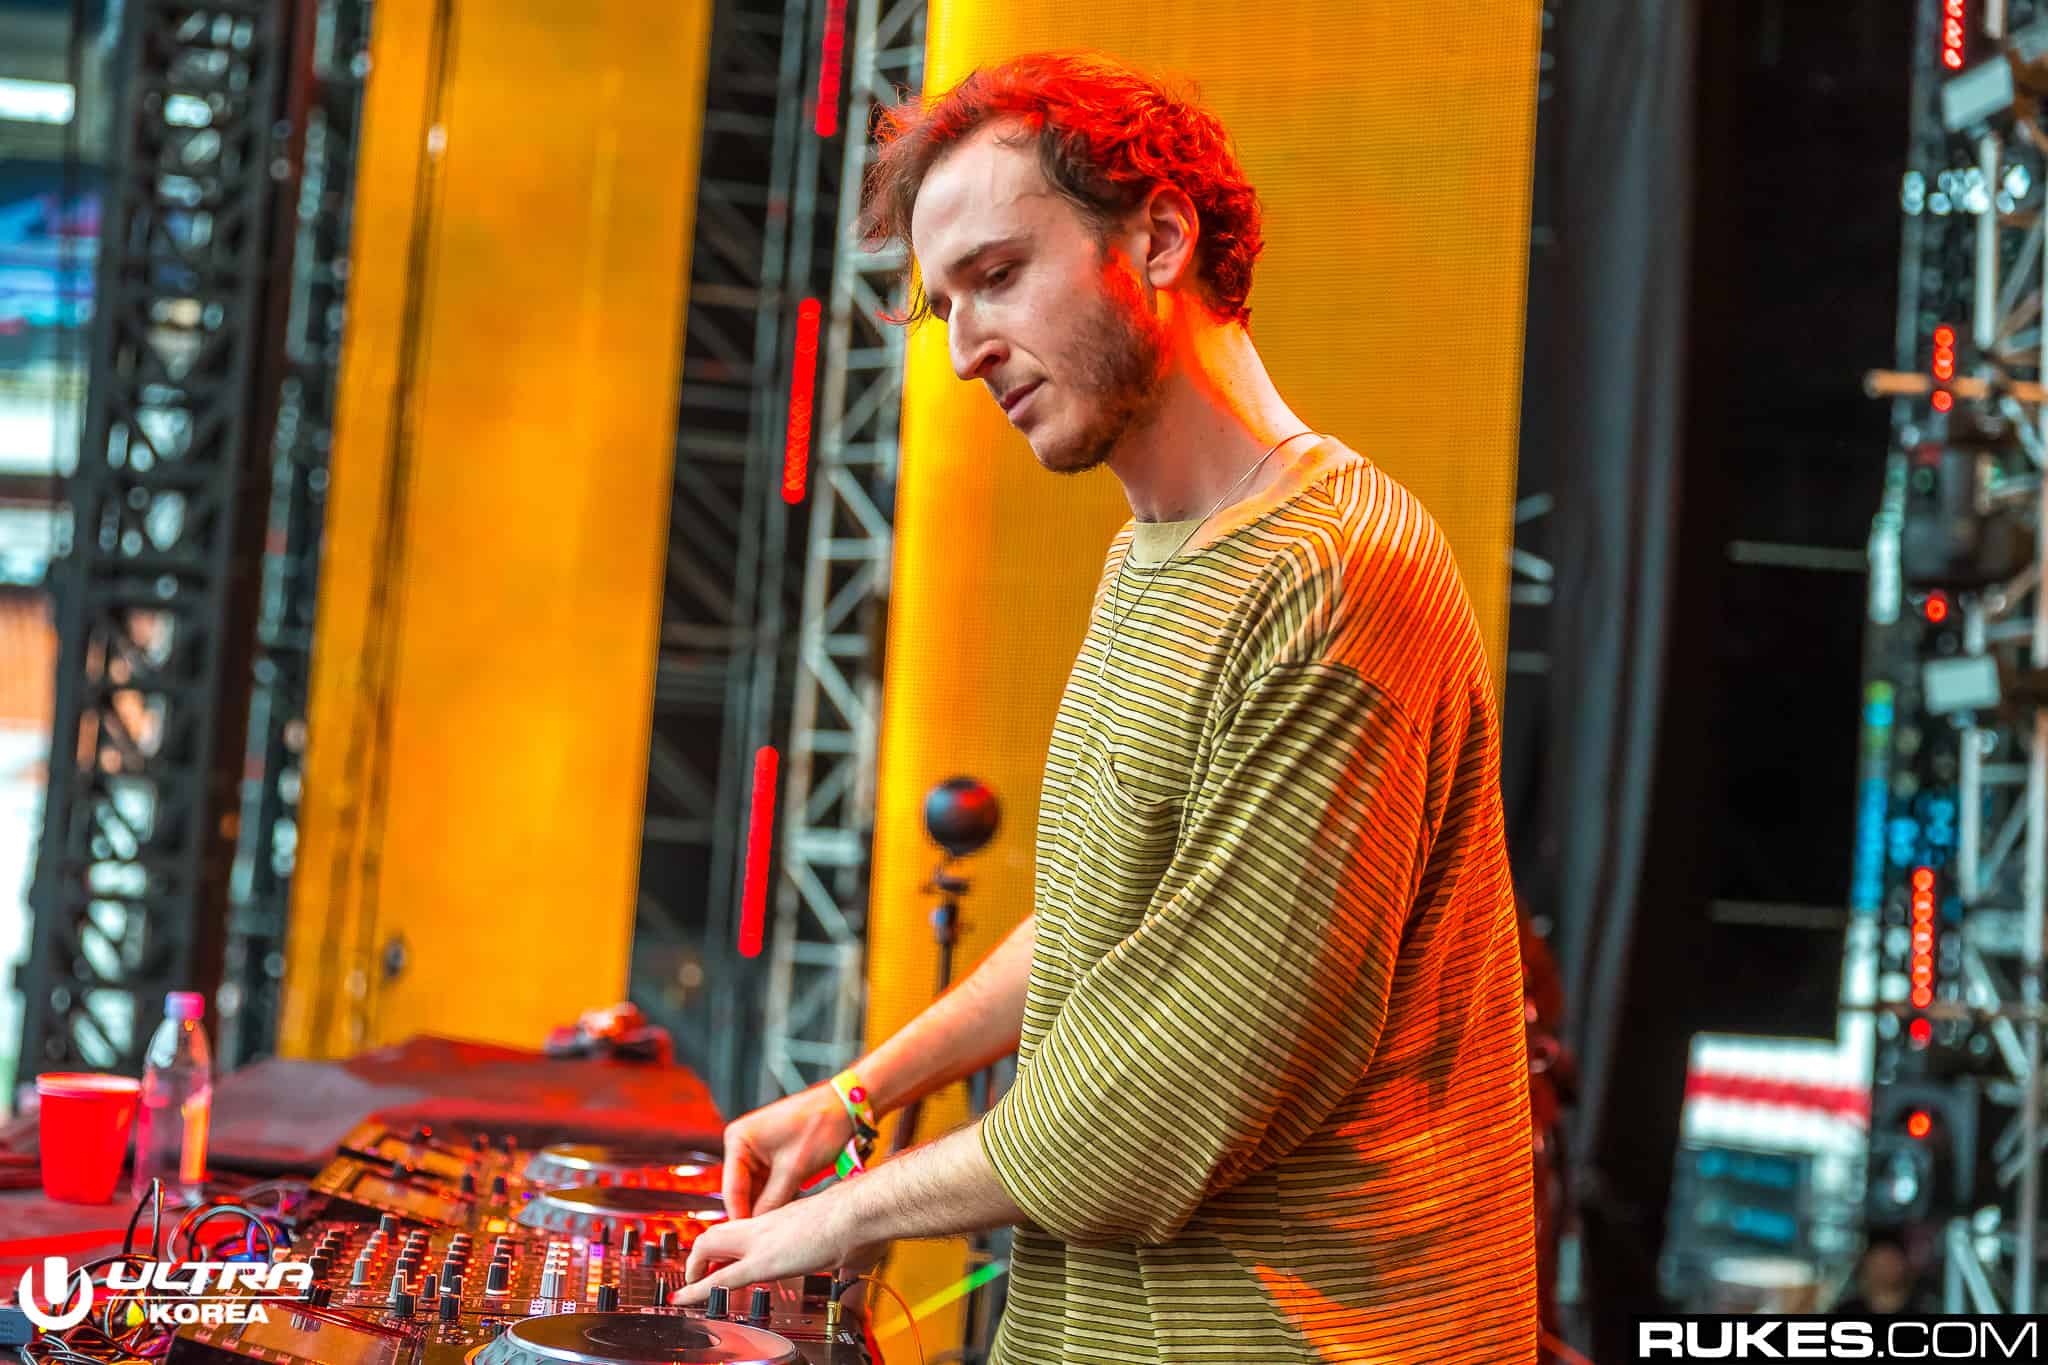 RL Grime teases several unreleased songs during Chicago headline show: Watch